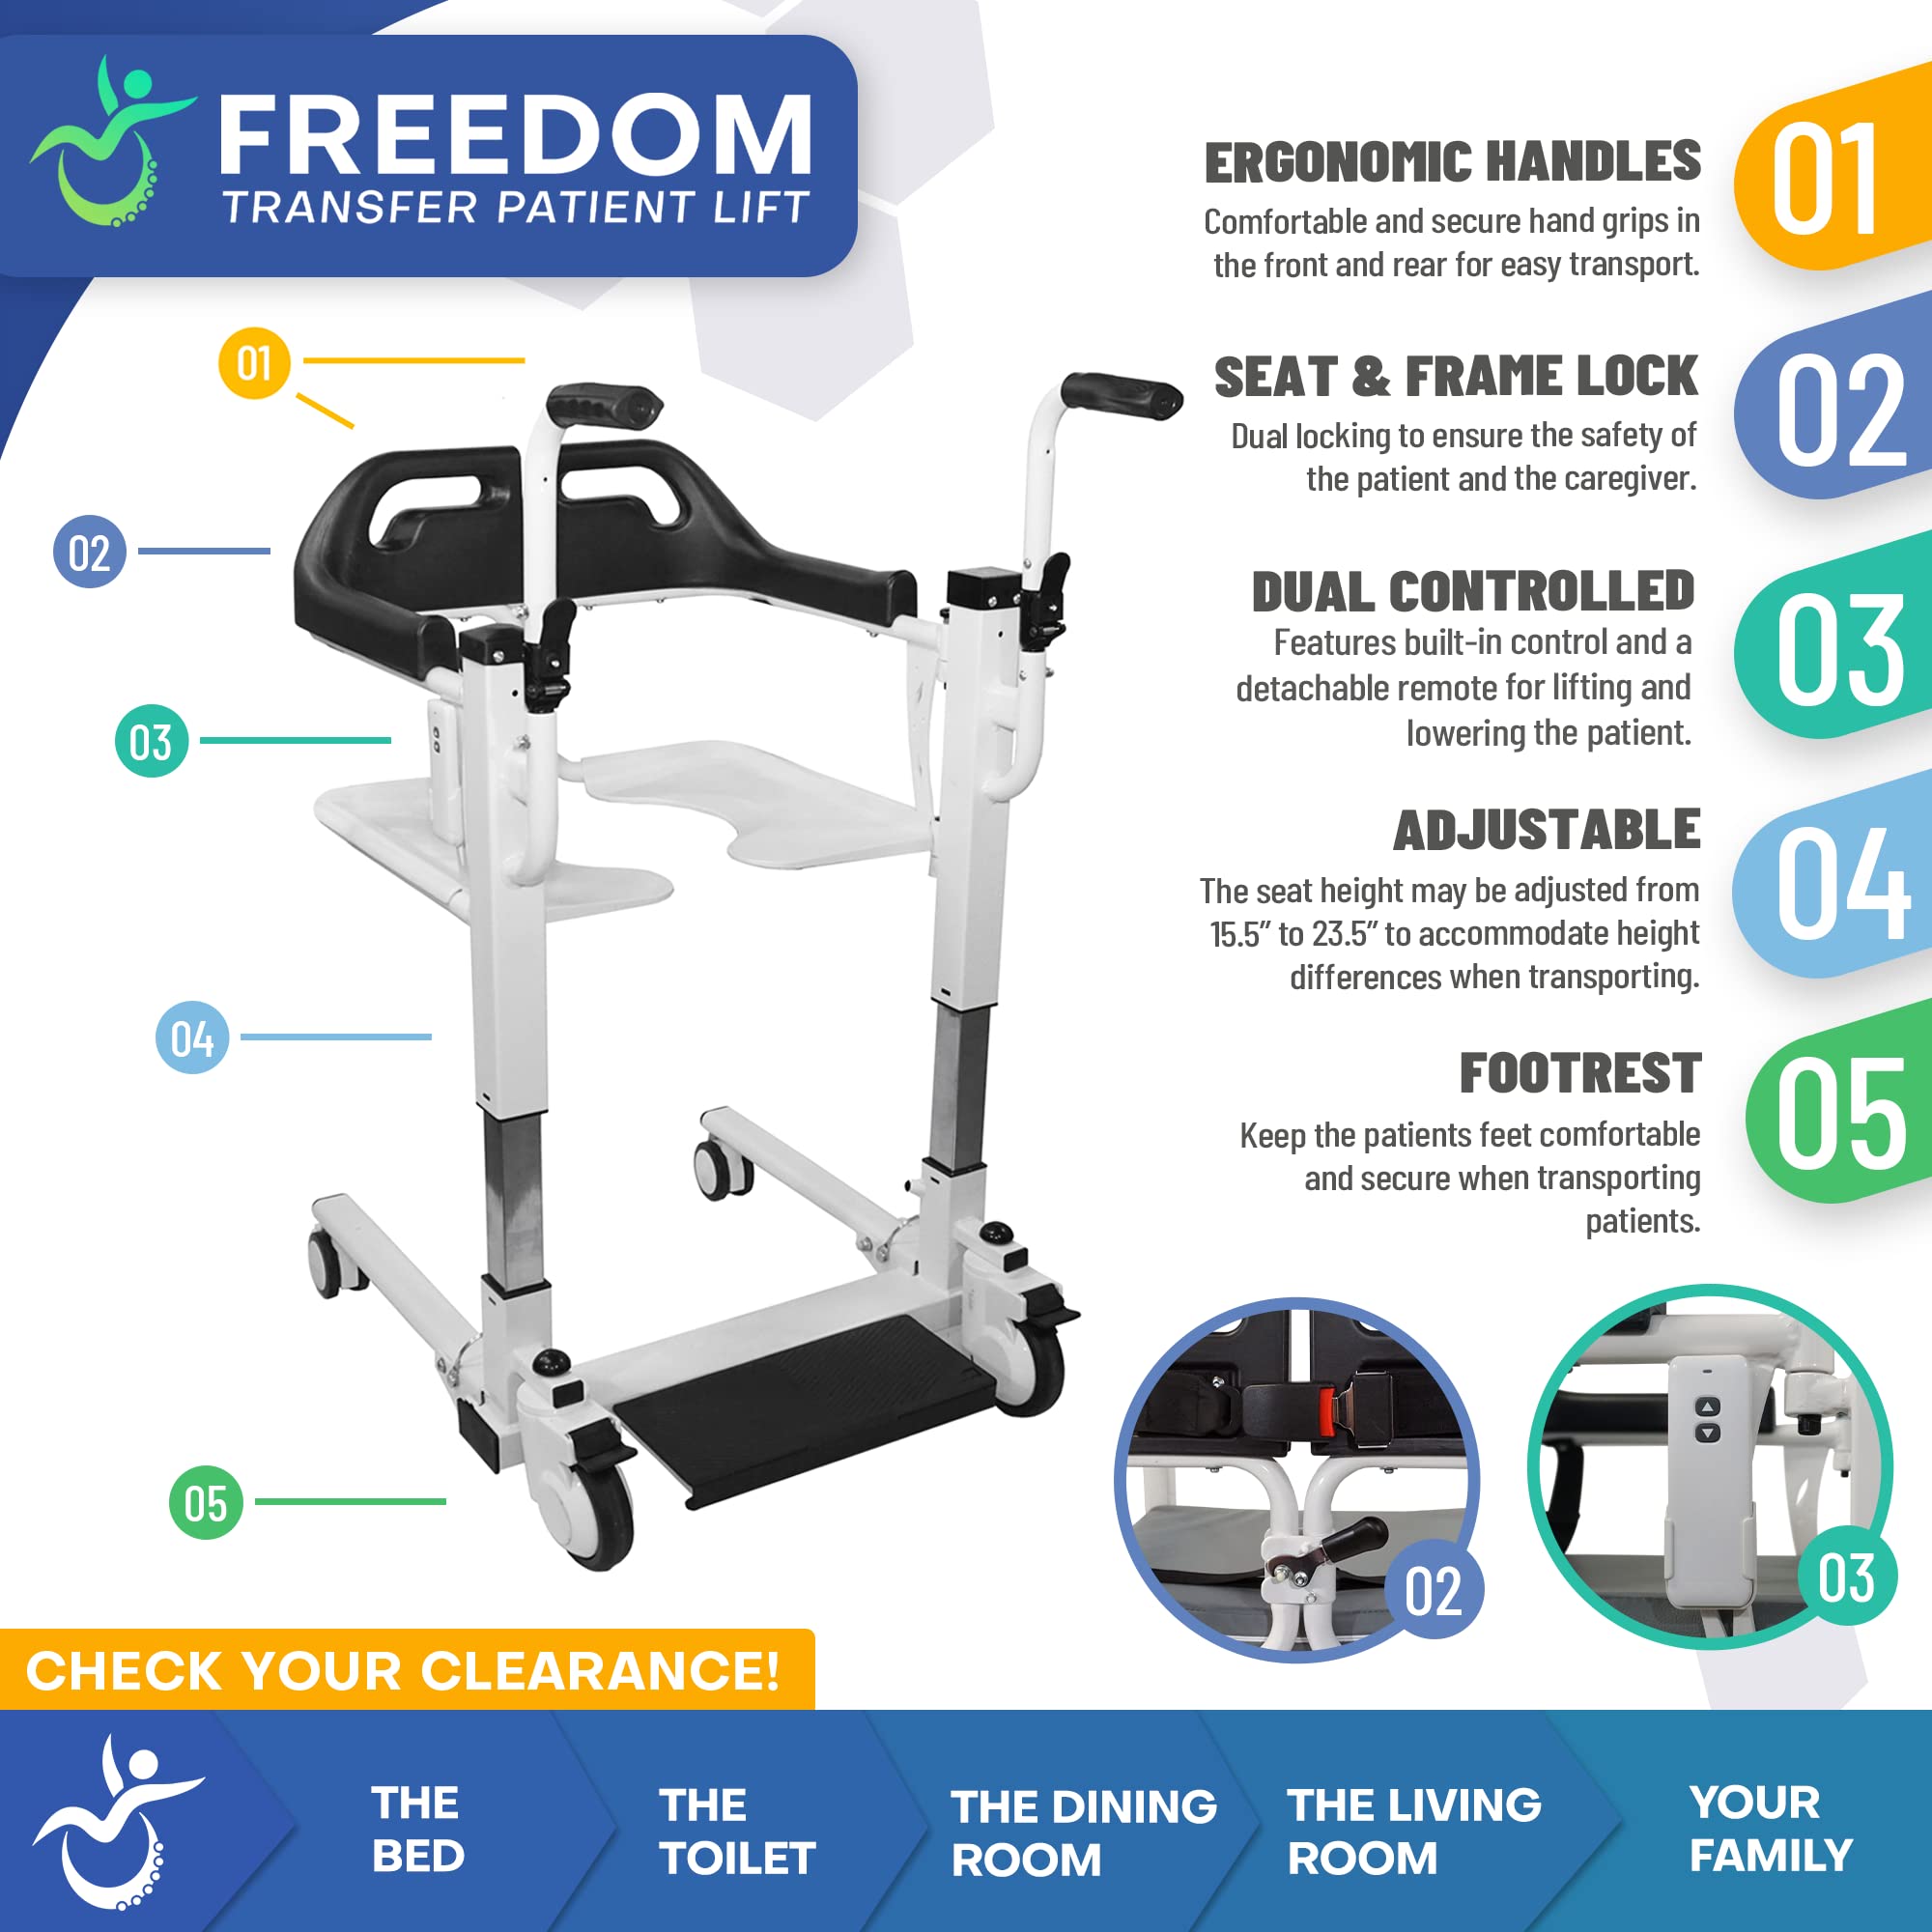 Freedom Transfer Battery Powered Patient Lift by Mobile Patient Lift - Portable Multi-Purpose Patient Lift Alternative for Caregivers, Elderly, or Senior Living